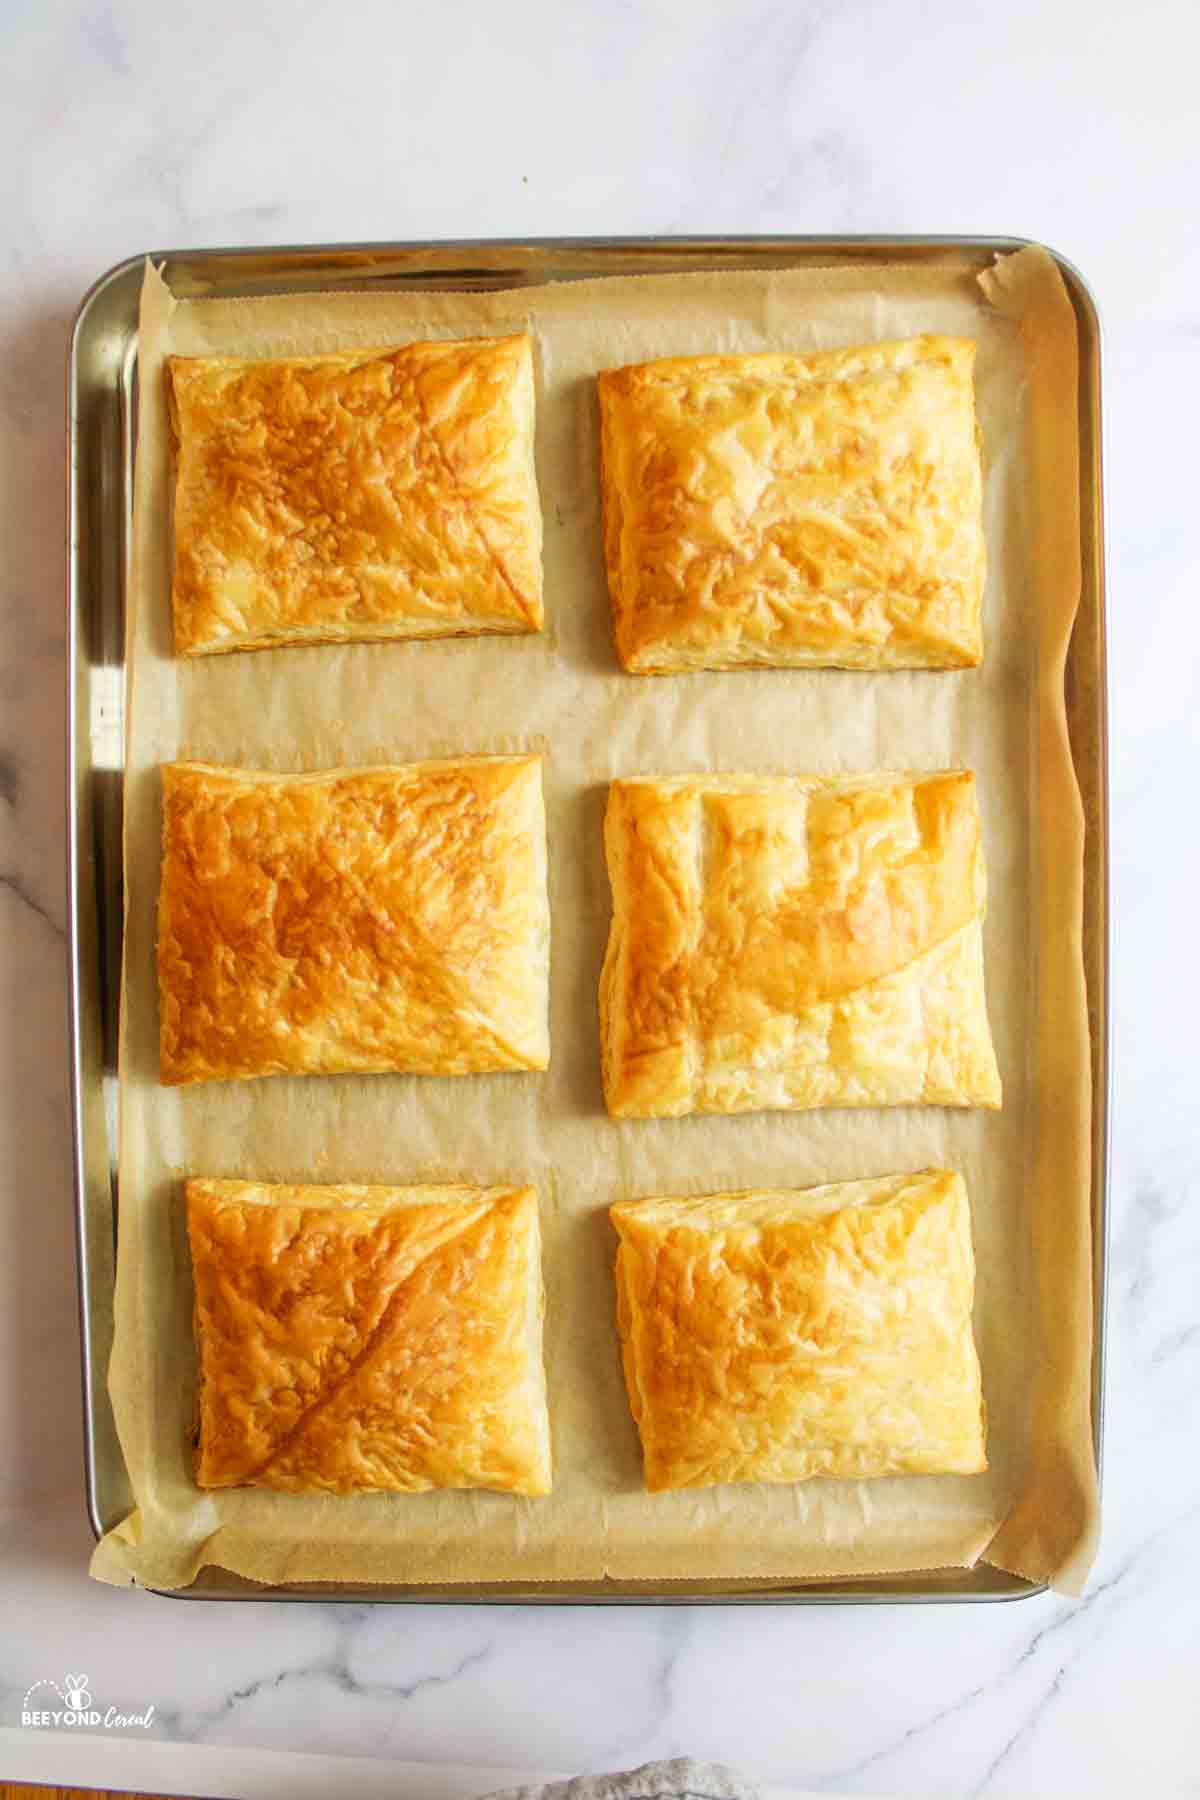 6 baked squares of puff pastry on a parchment paper lined baking sheet